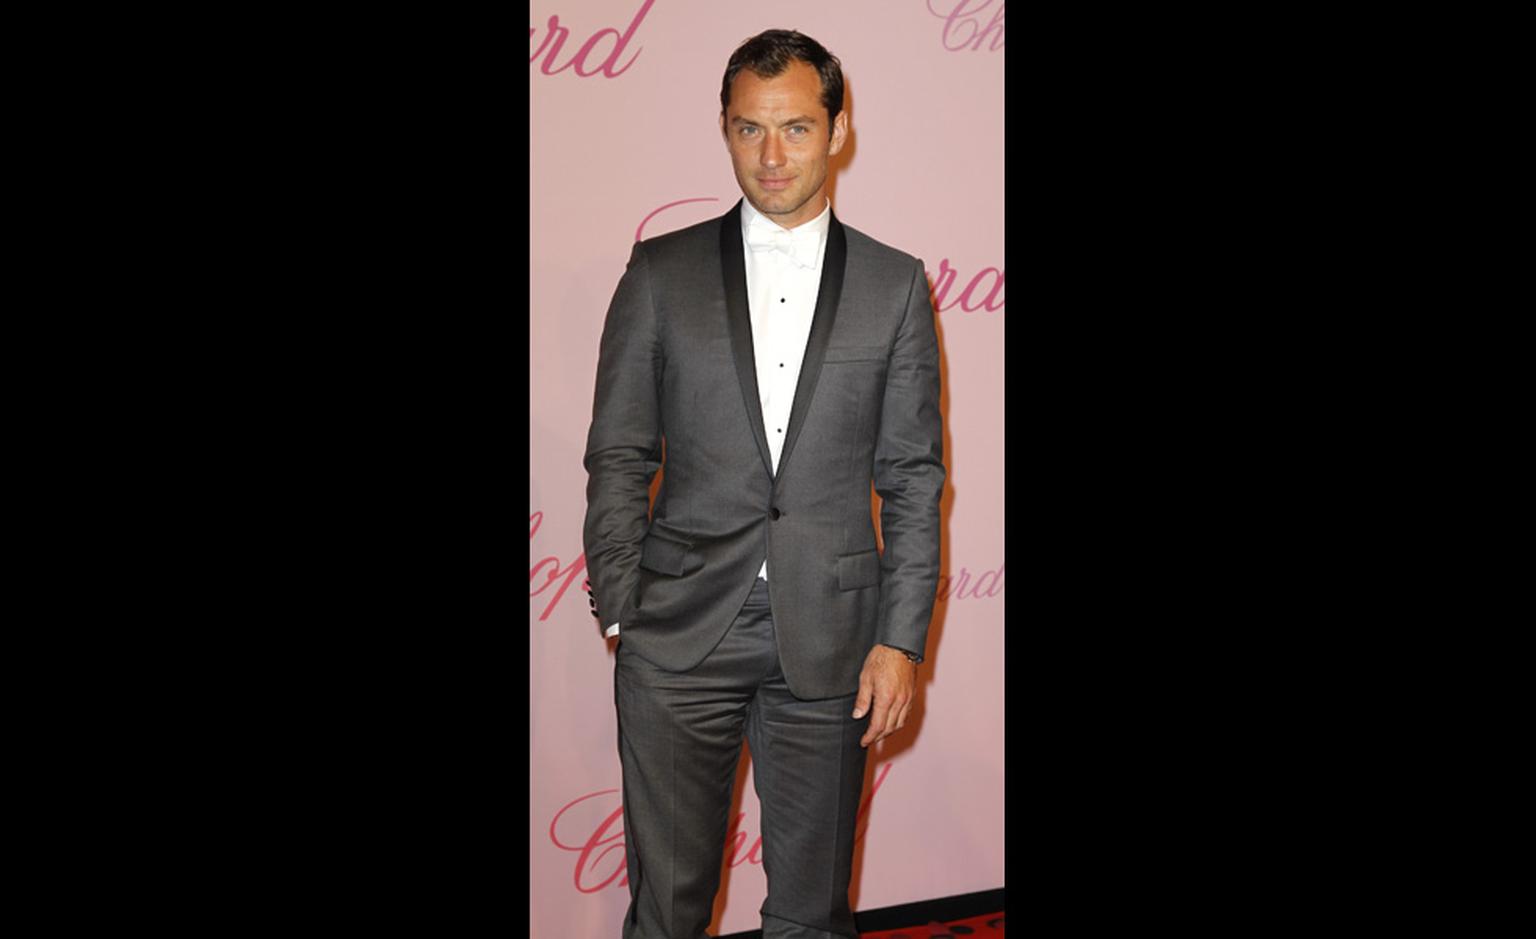 Jude Law at Chopard's Crazy Diamonds party at the Cannes Film Festival 2011 wearing a Chopard watch.